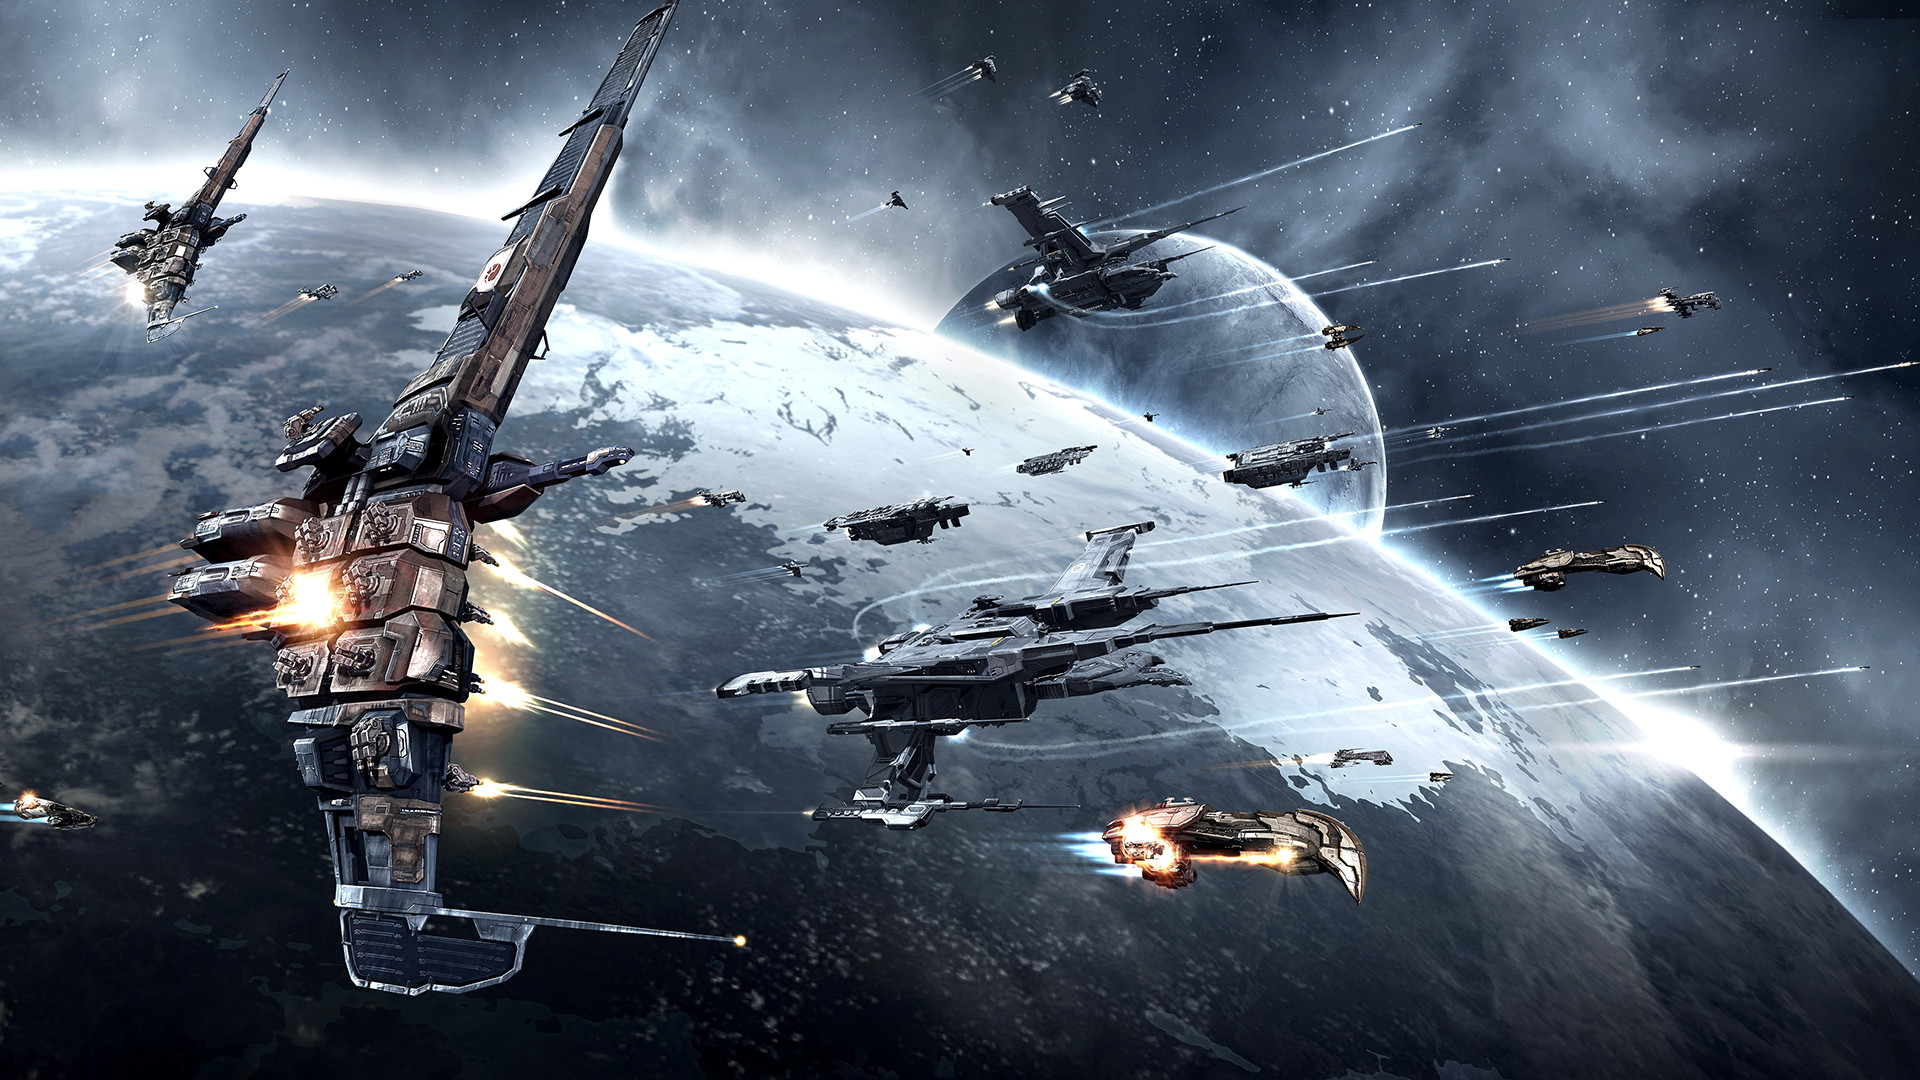 Enraged EVE Online Player Offers $99,000 Bounty On Enemy Corporation